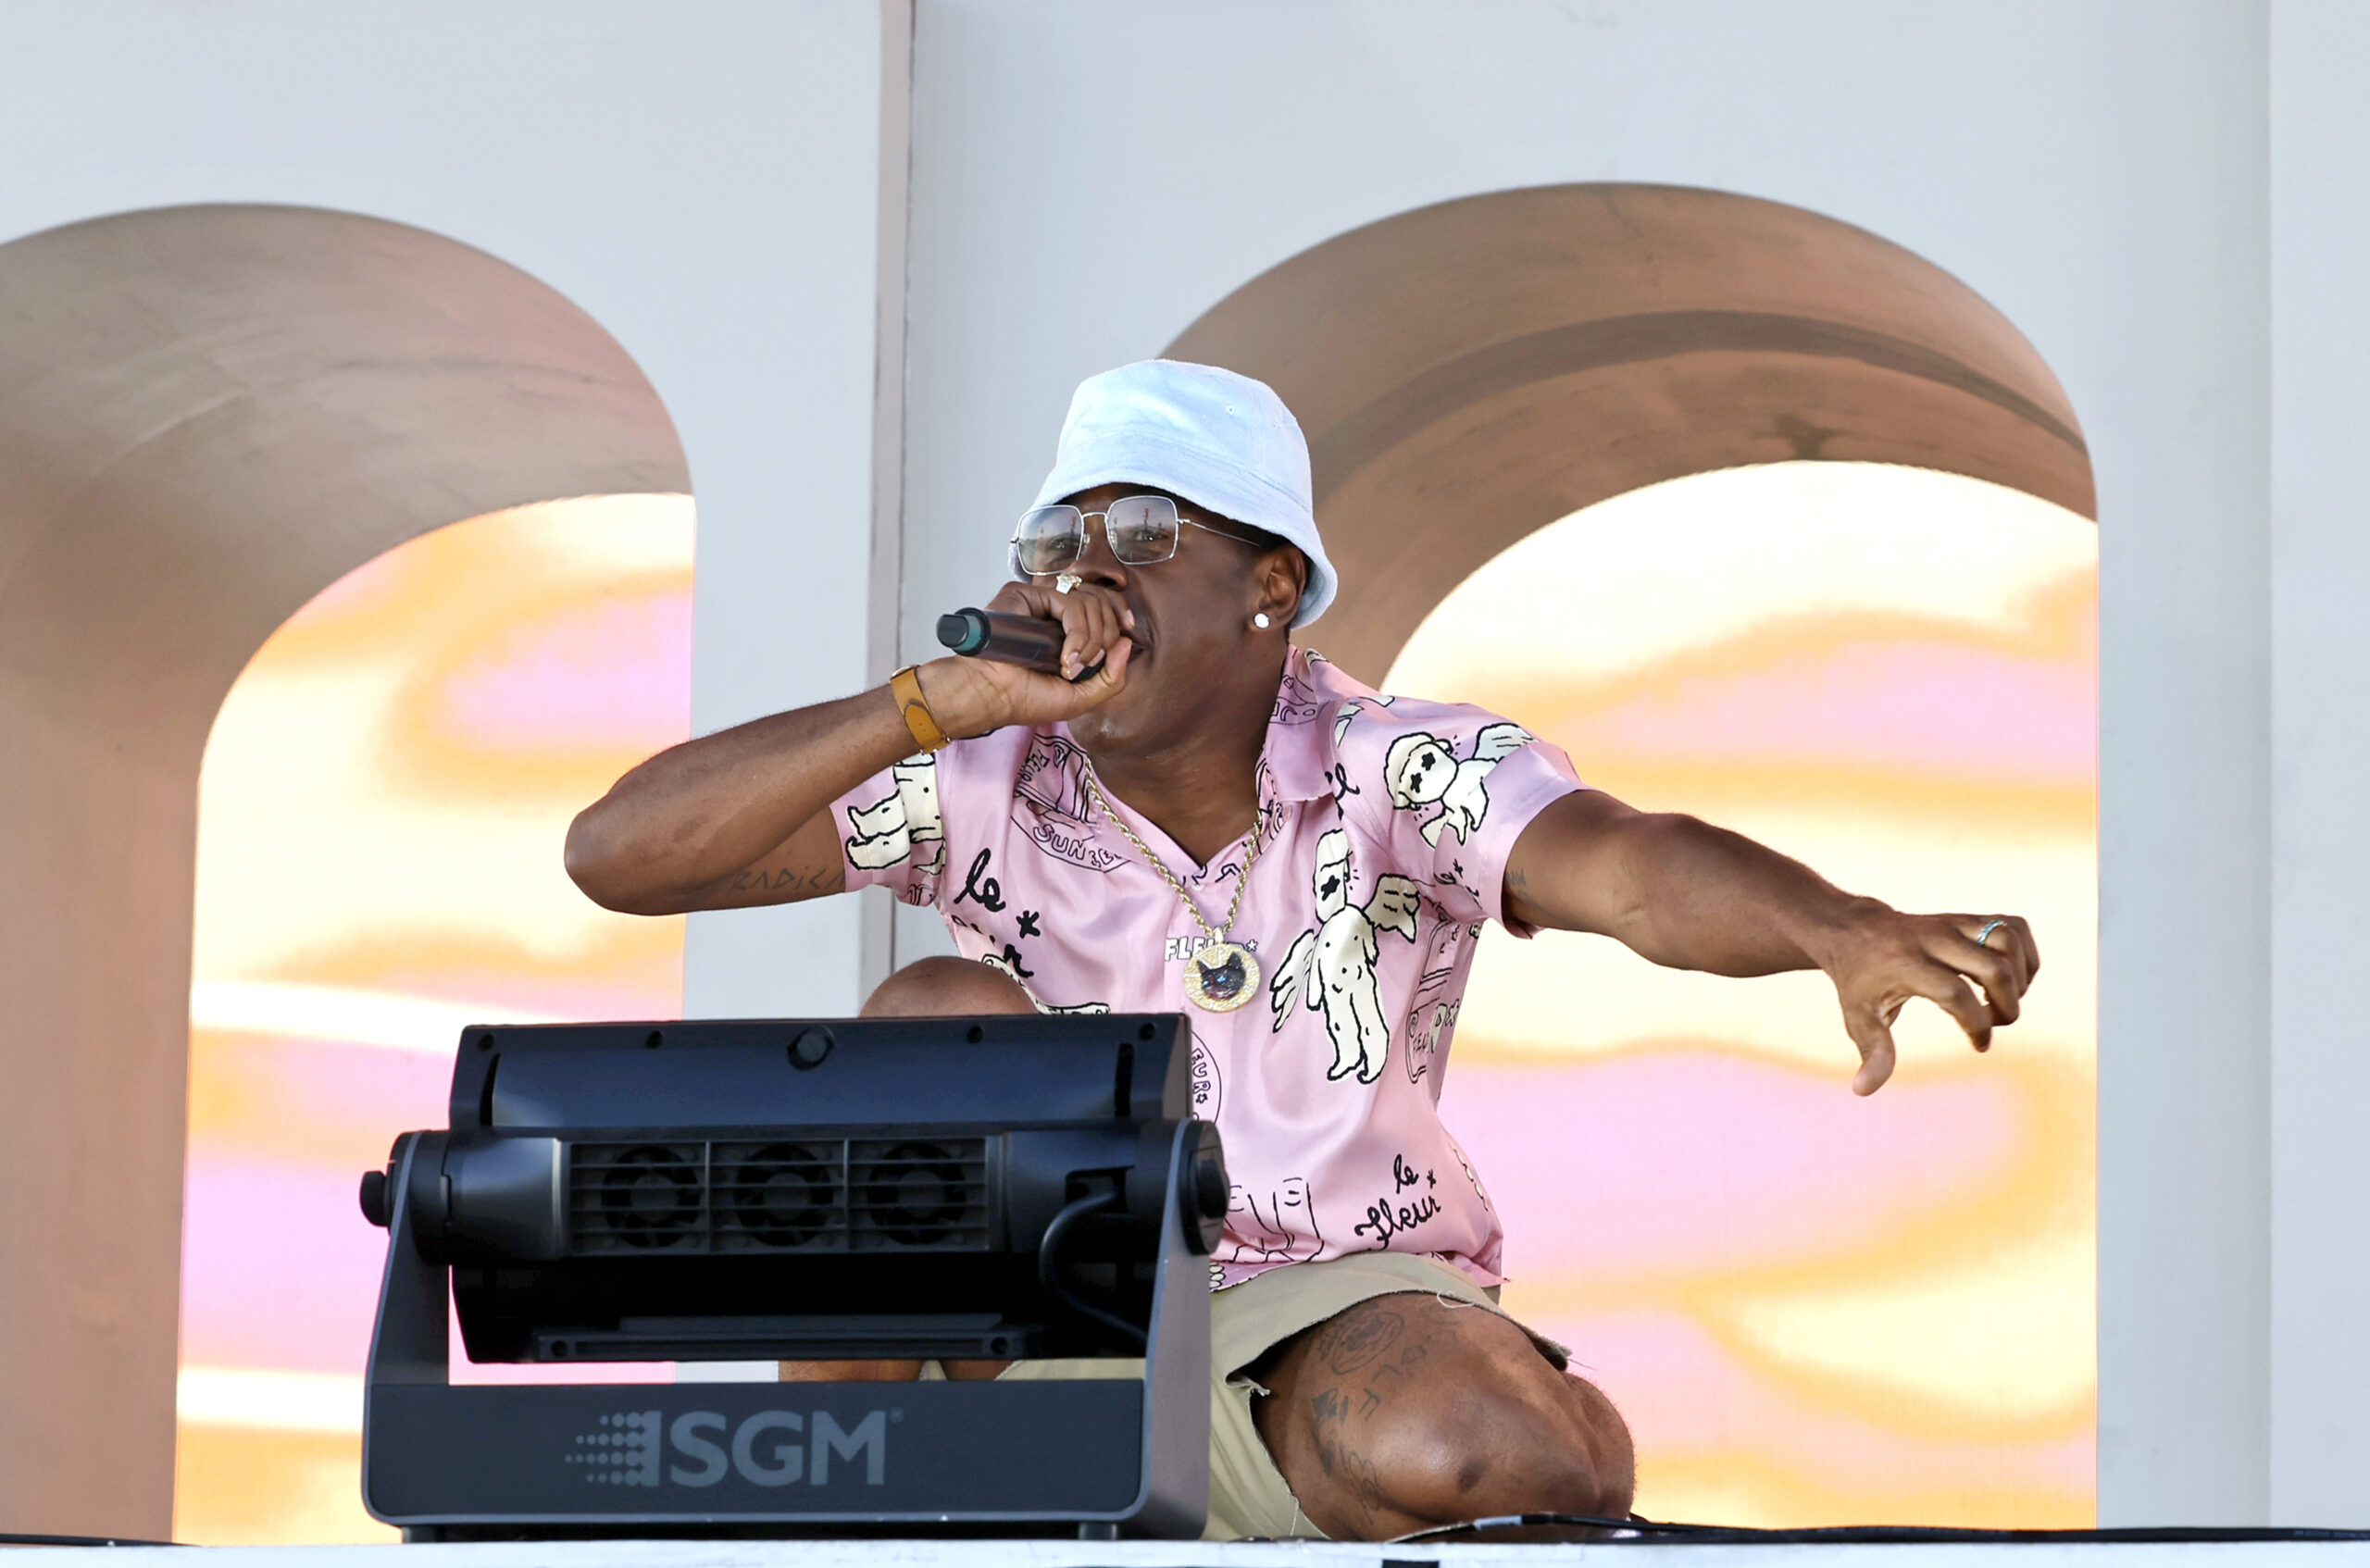 INDIO, CALIFORNIA - APRIL 16: Tyler, the Creator performs with Kali Uchis at the Coachella Stage during the 2023 Coachella Valley Music and Arts Festival on April 16, 2023 in Indio, California. (Photo by Frazer Harrison/Getty Images for Coachella)